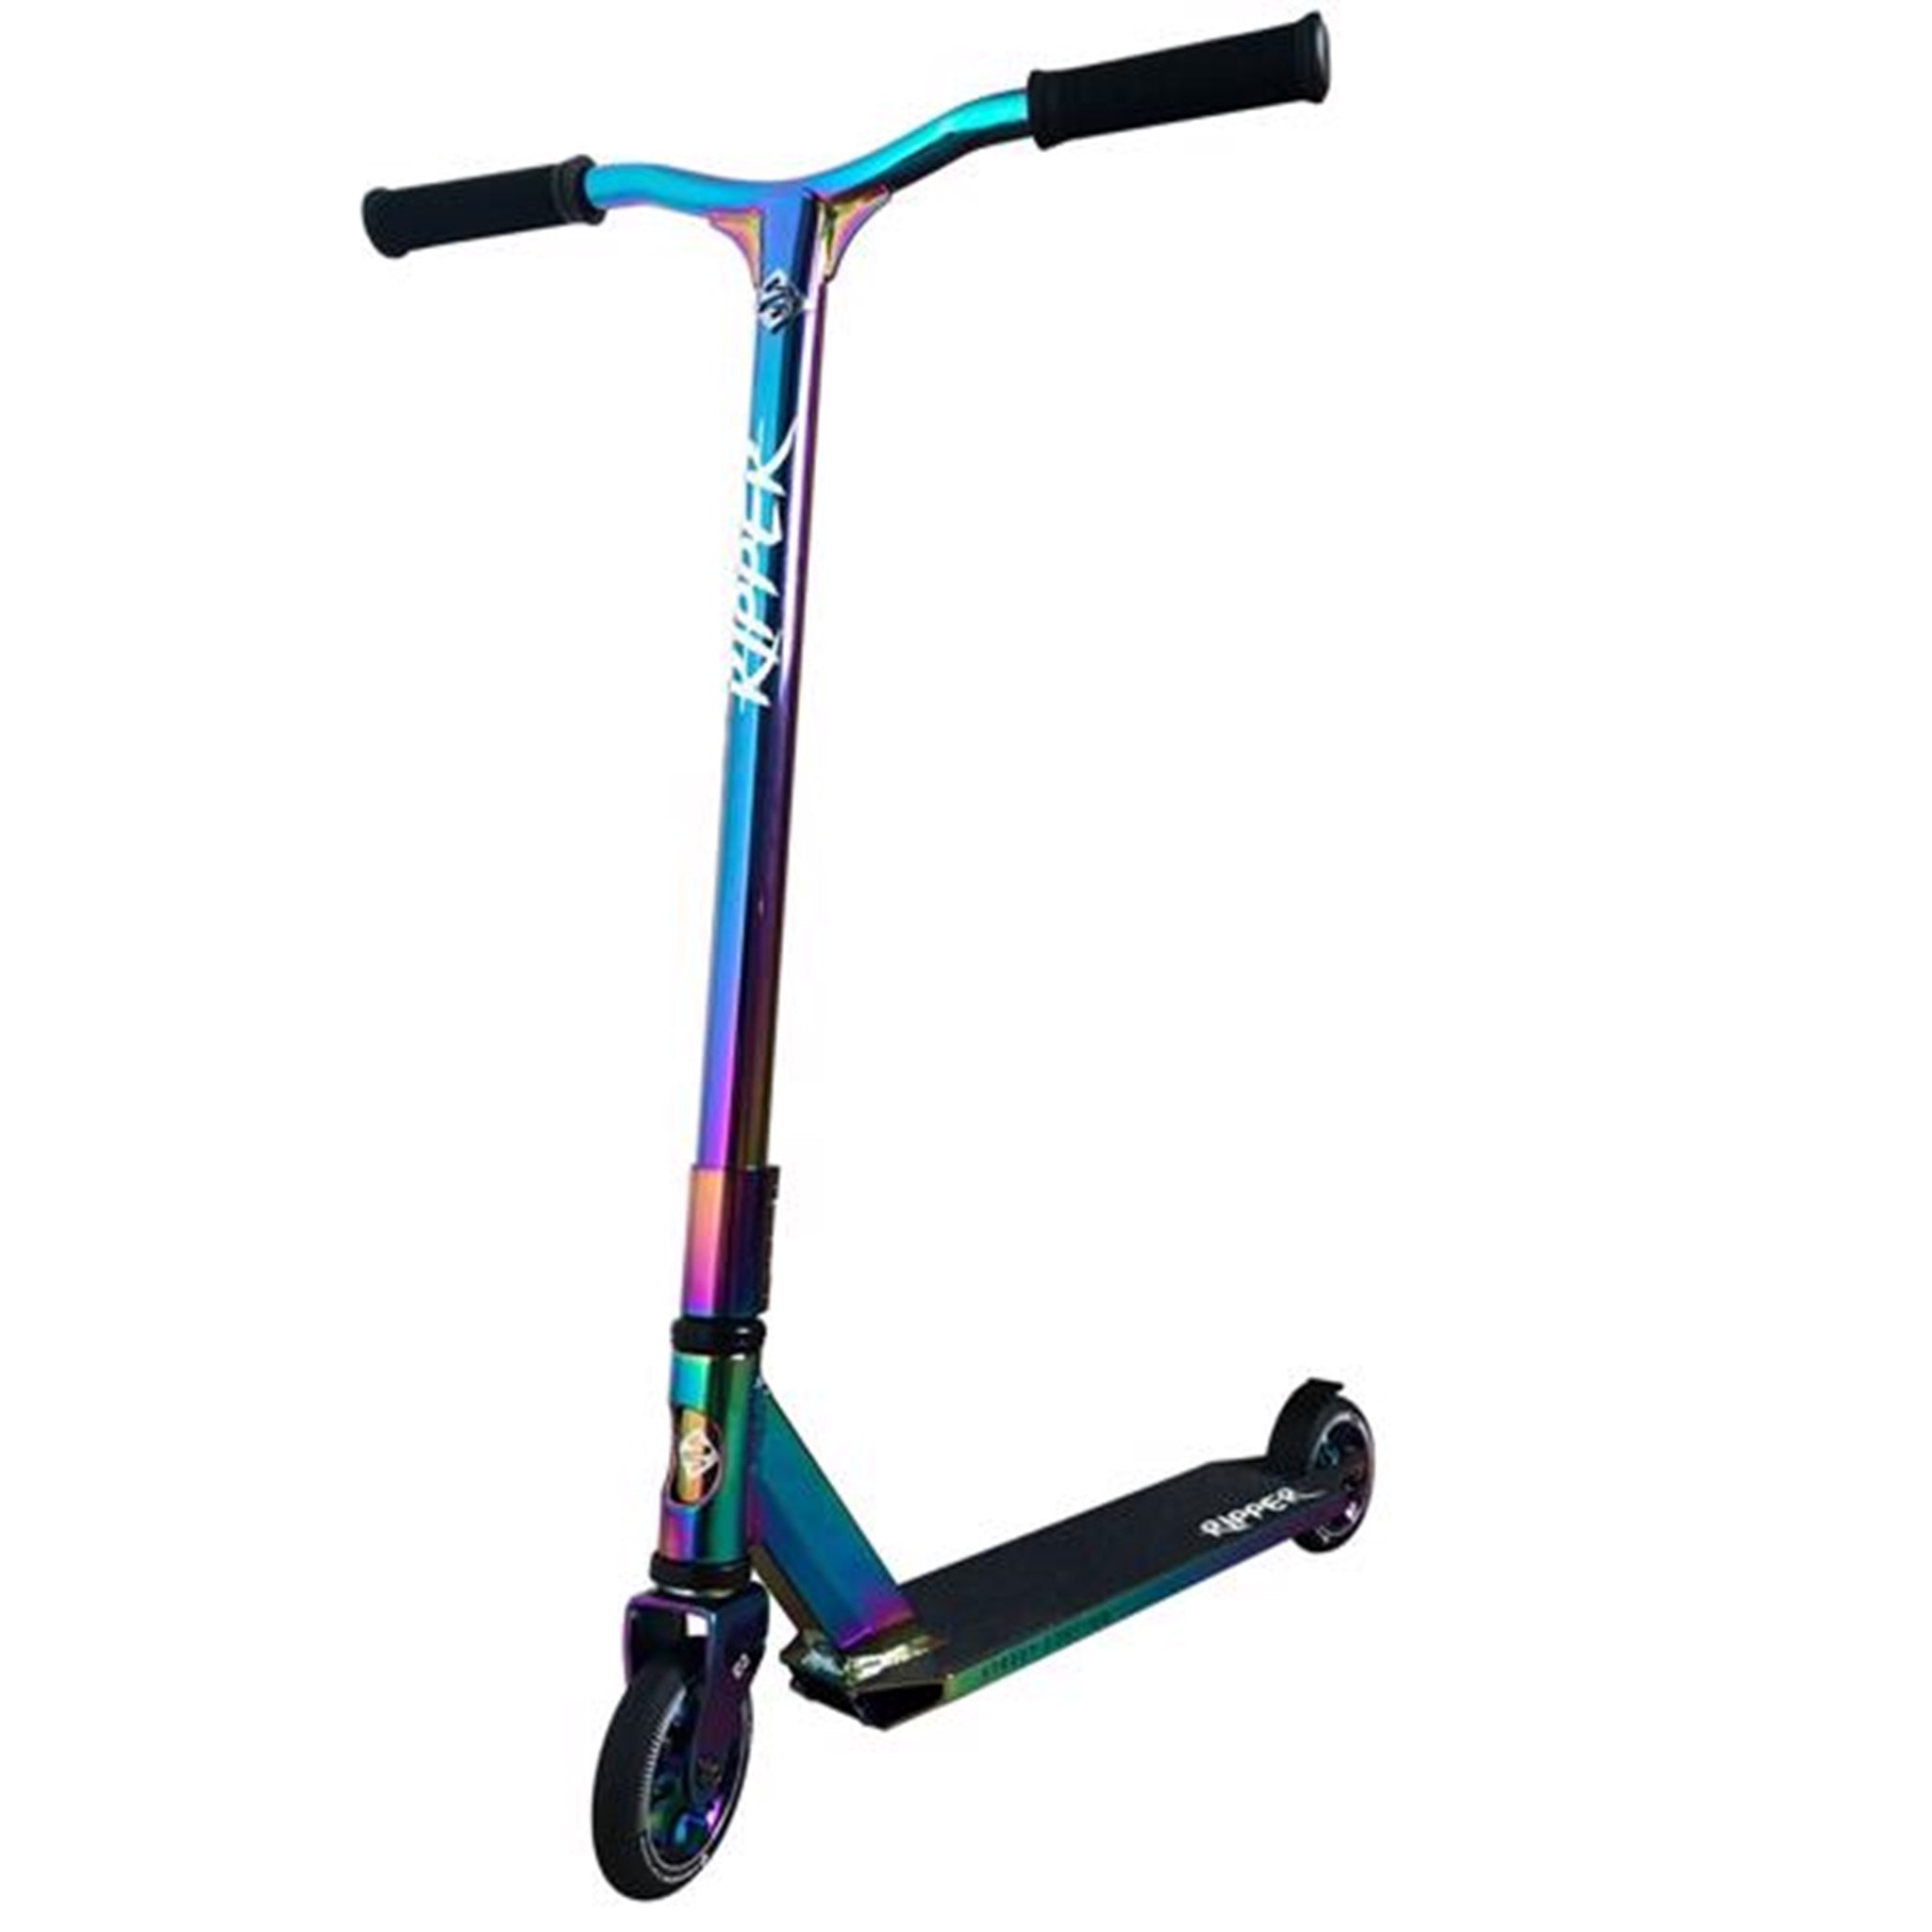 Street Surfing Scooter Ripper Neochrome